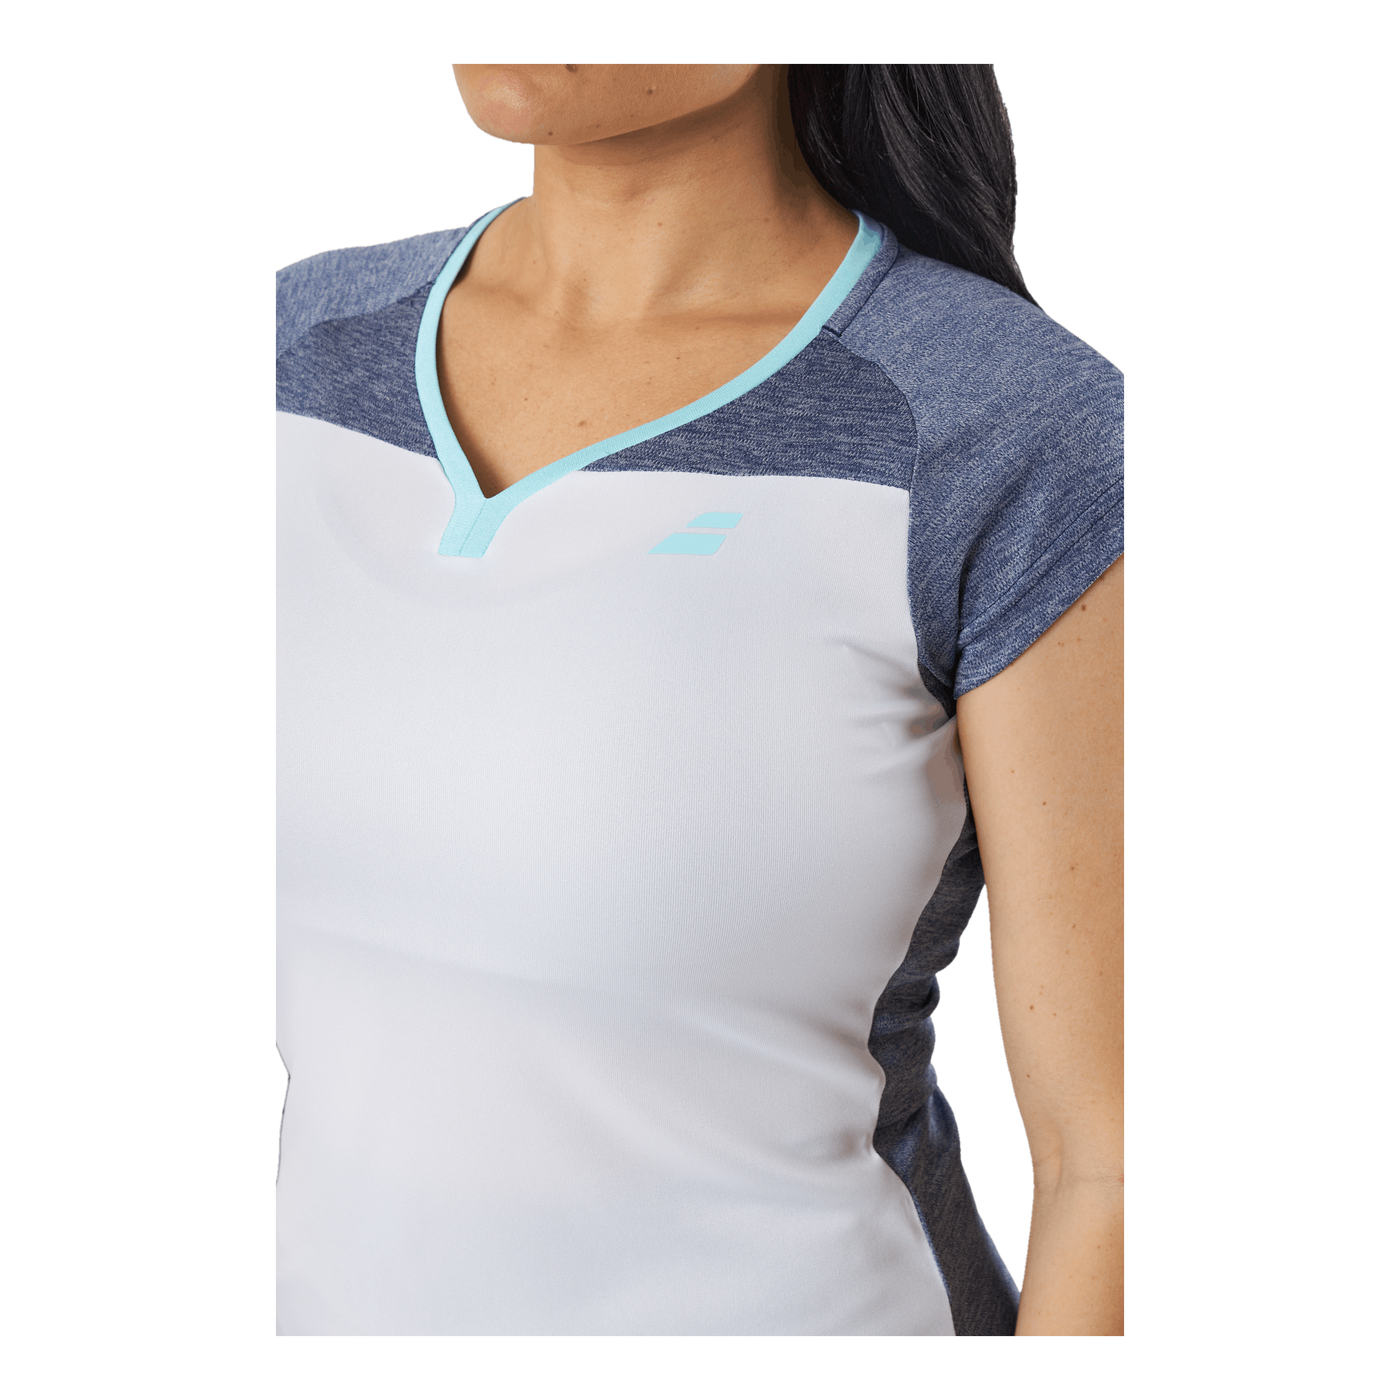 babolat cap sleeve top play white/blue